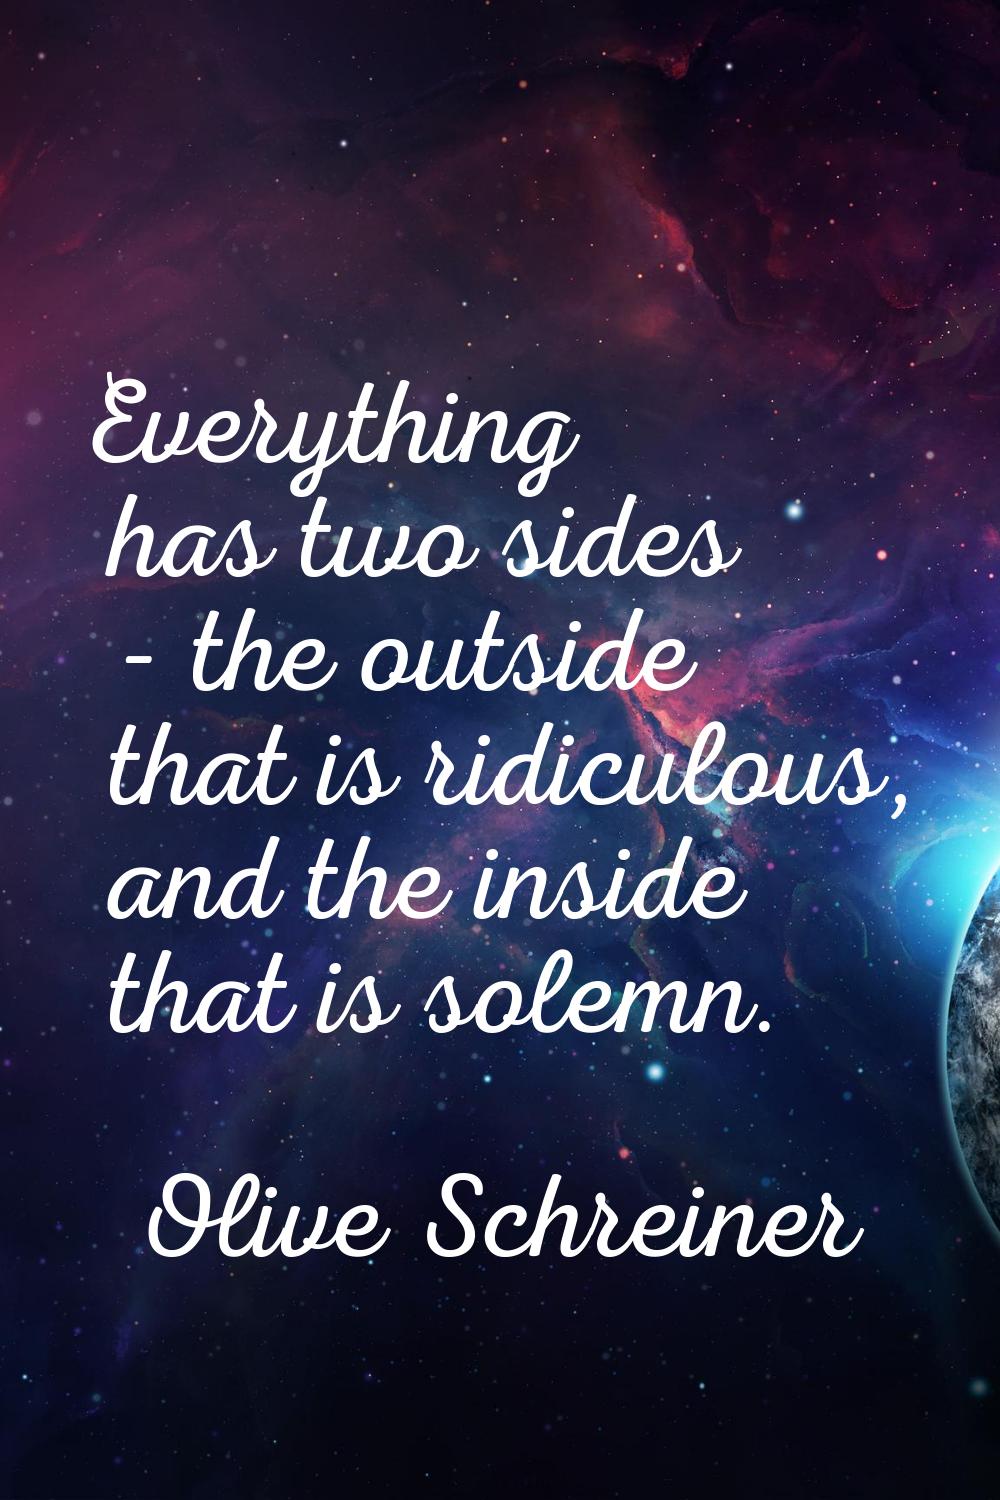 Everything has two sides - the outside that is ridiculous, and the inside that is solemn.